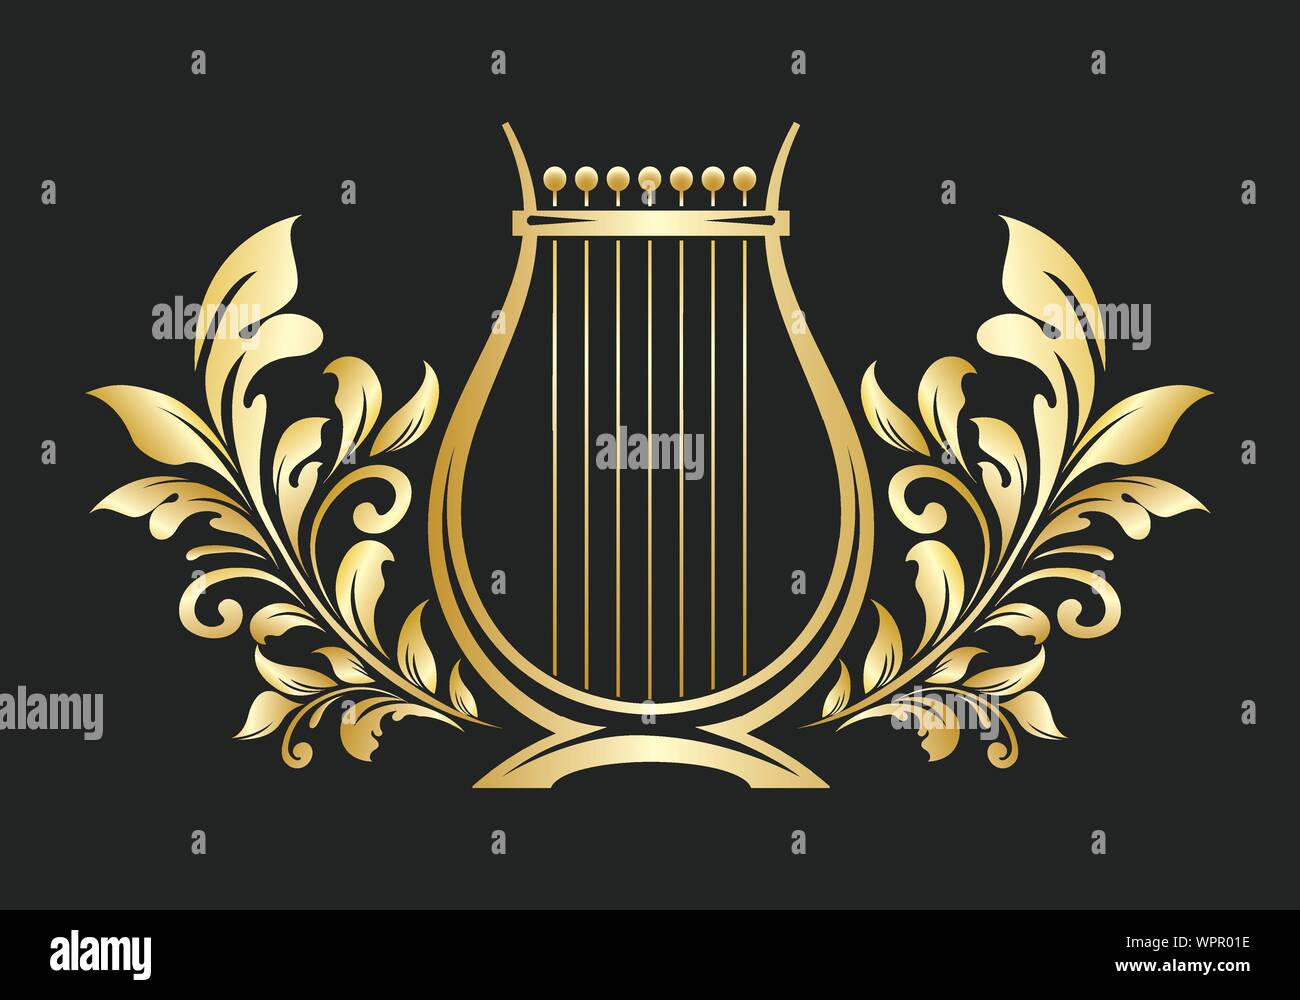 Lyre or cither Golden Emblem. Music logo or icon. Vector illustration. Stock Vector